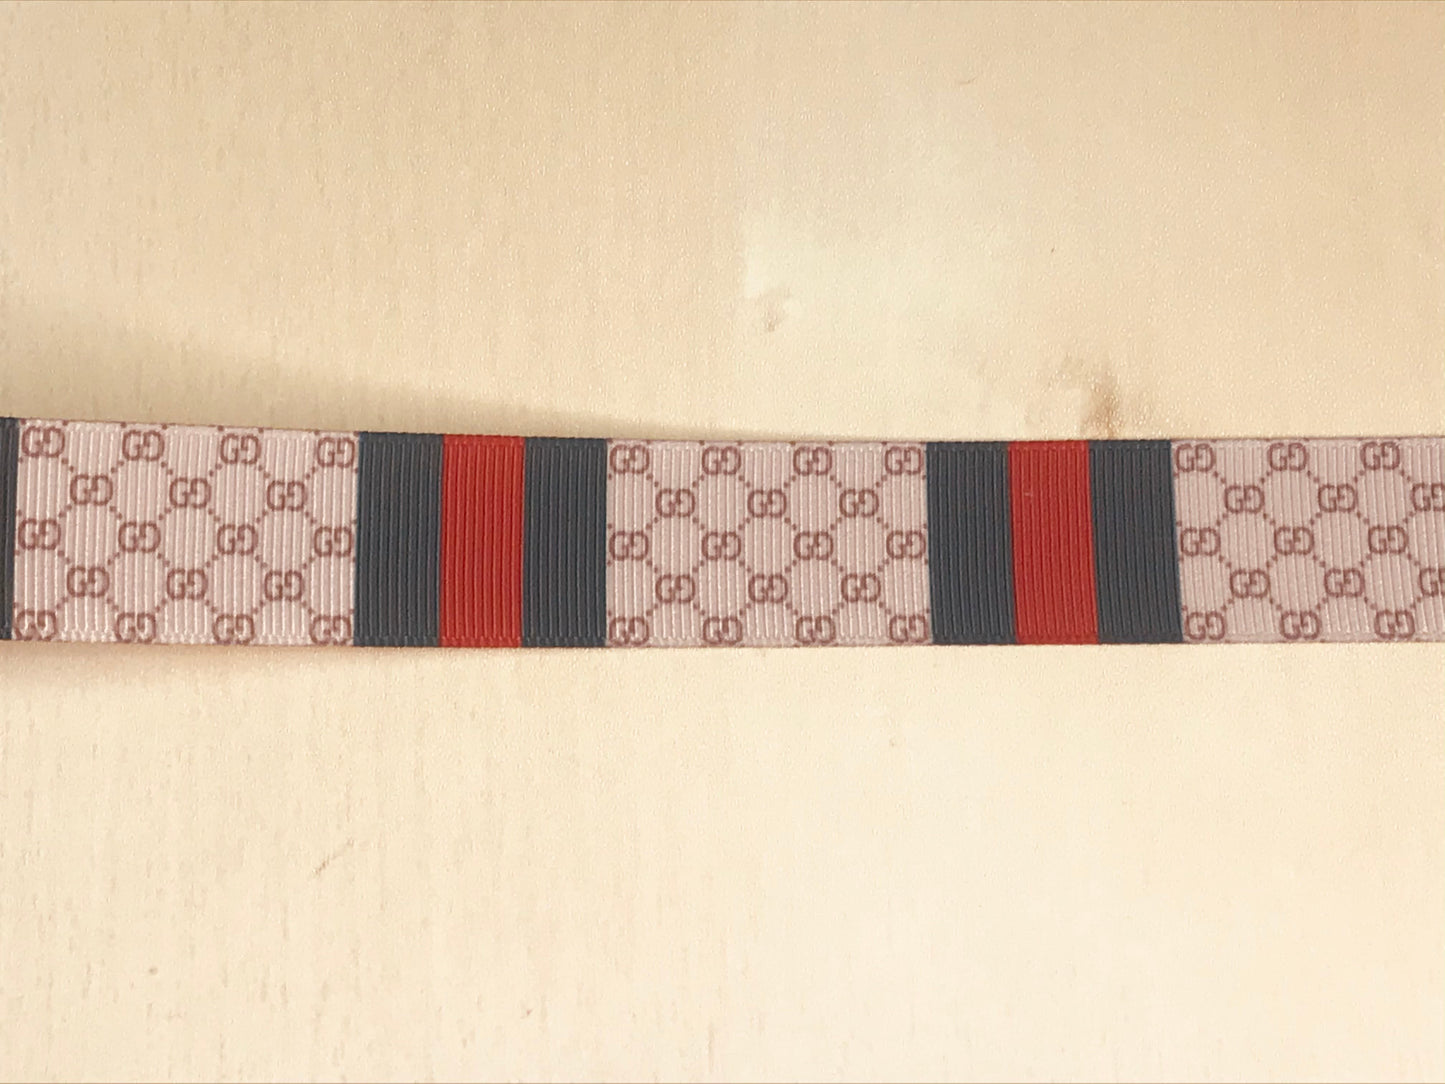 7/8" Green and Red Gucci GG Vertical Stripes Printed Grosgrain Ribbon